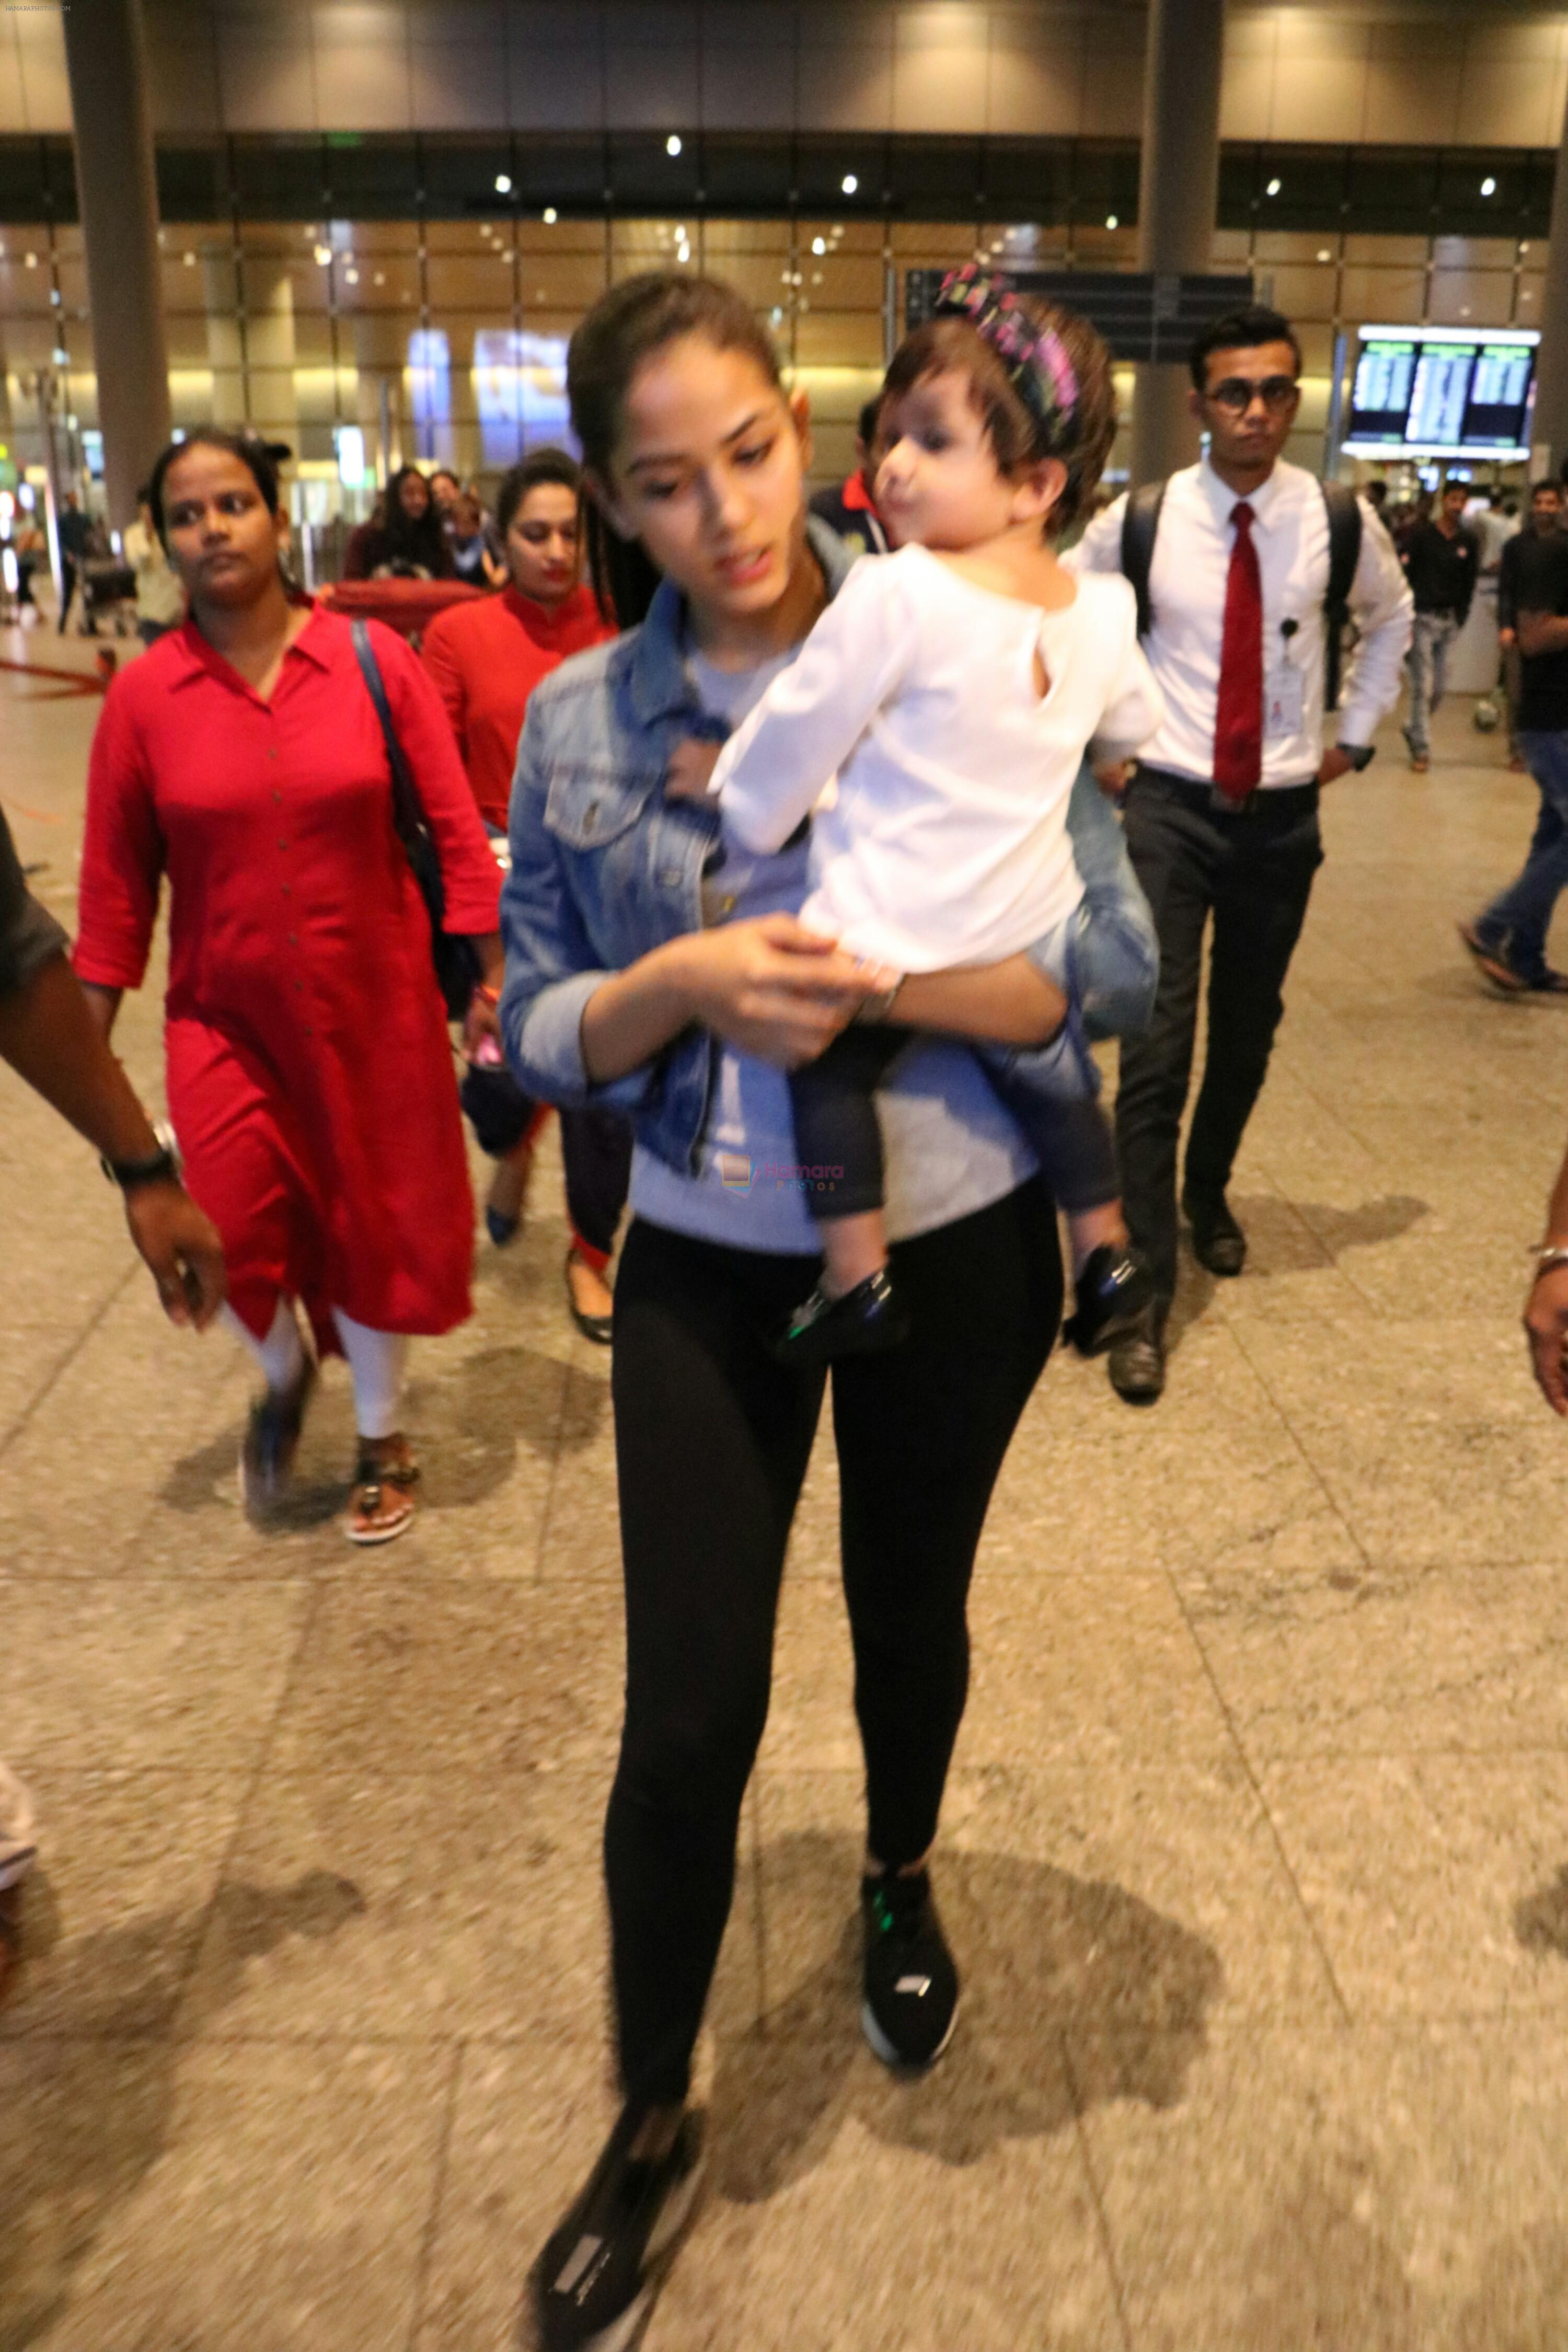 Mira Rajput & Her Daughter Spotted At Airport on 25th July 2017